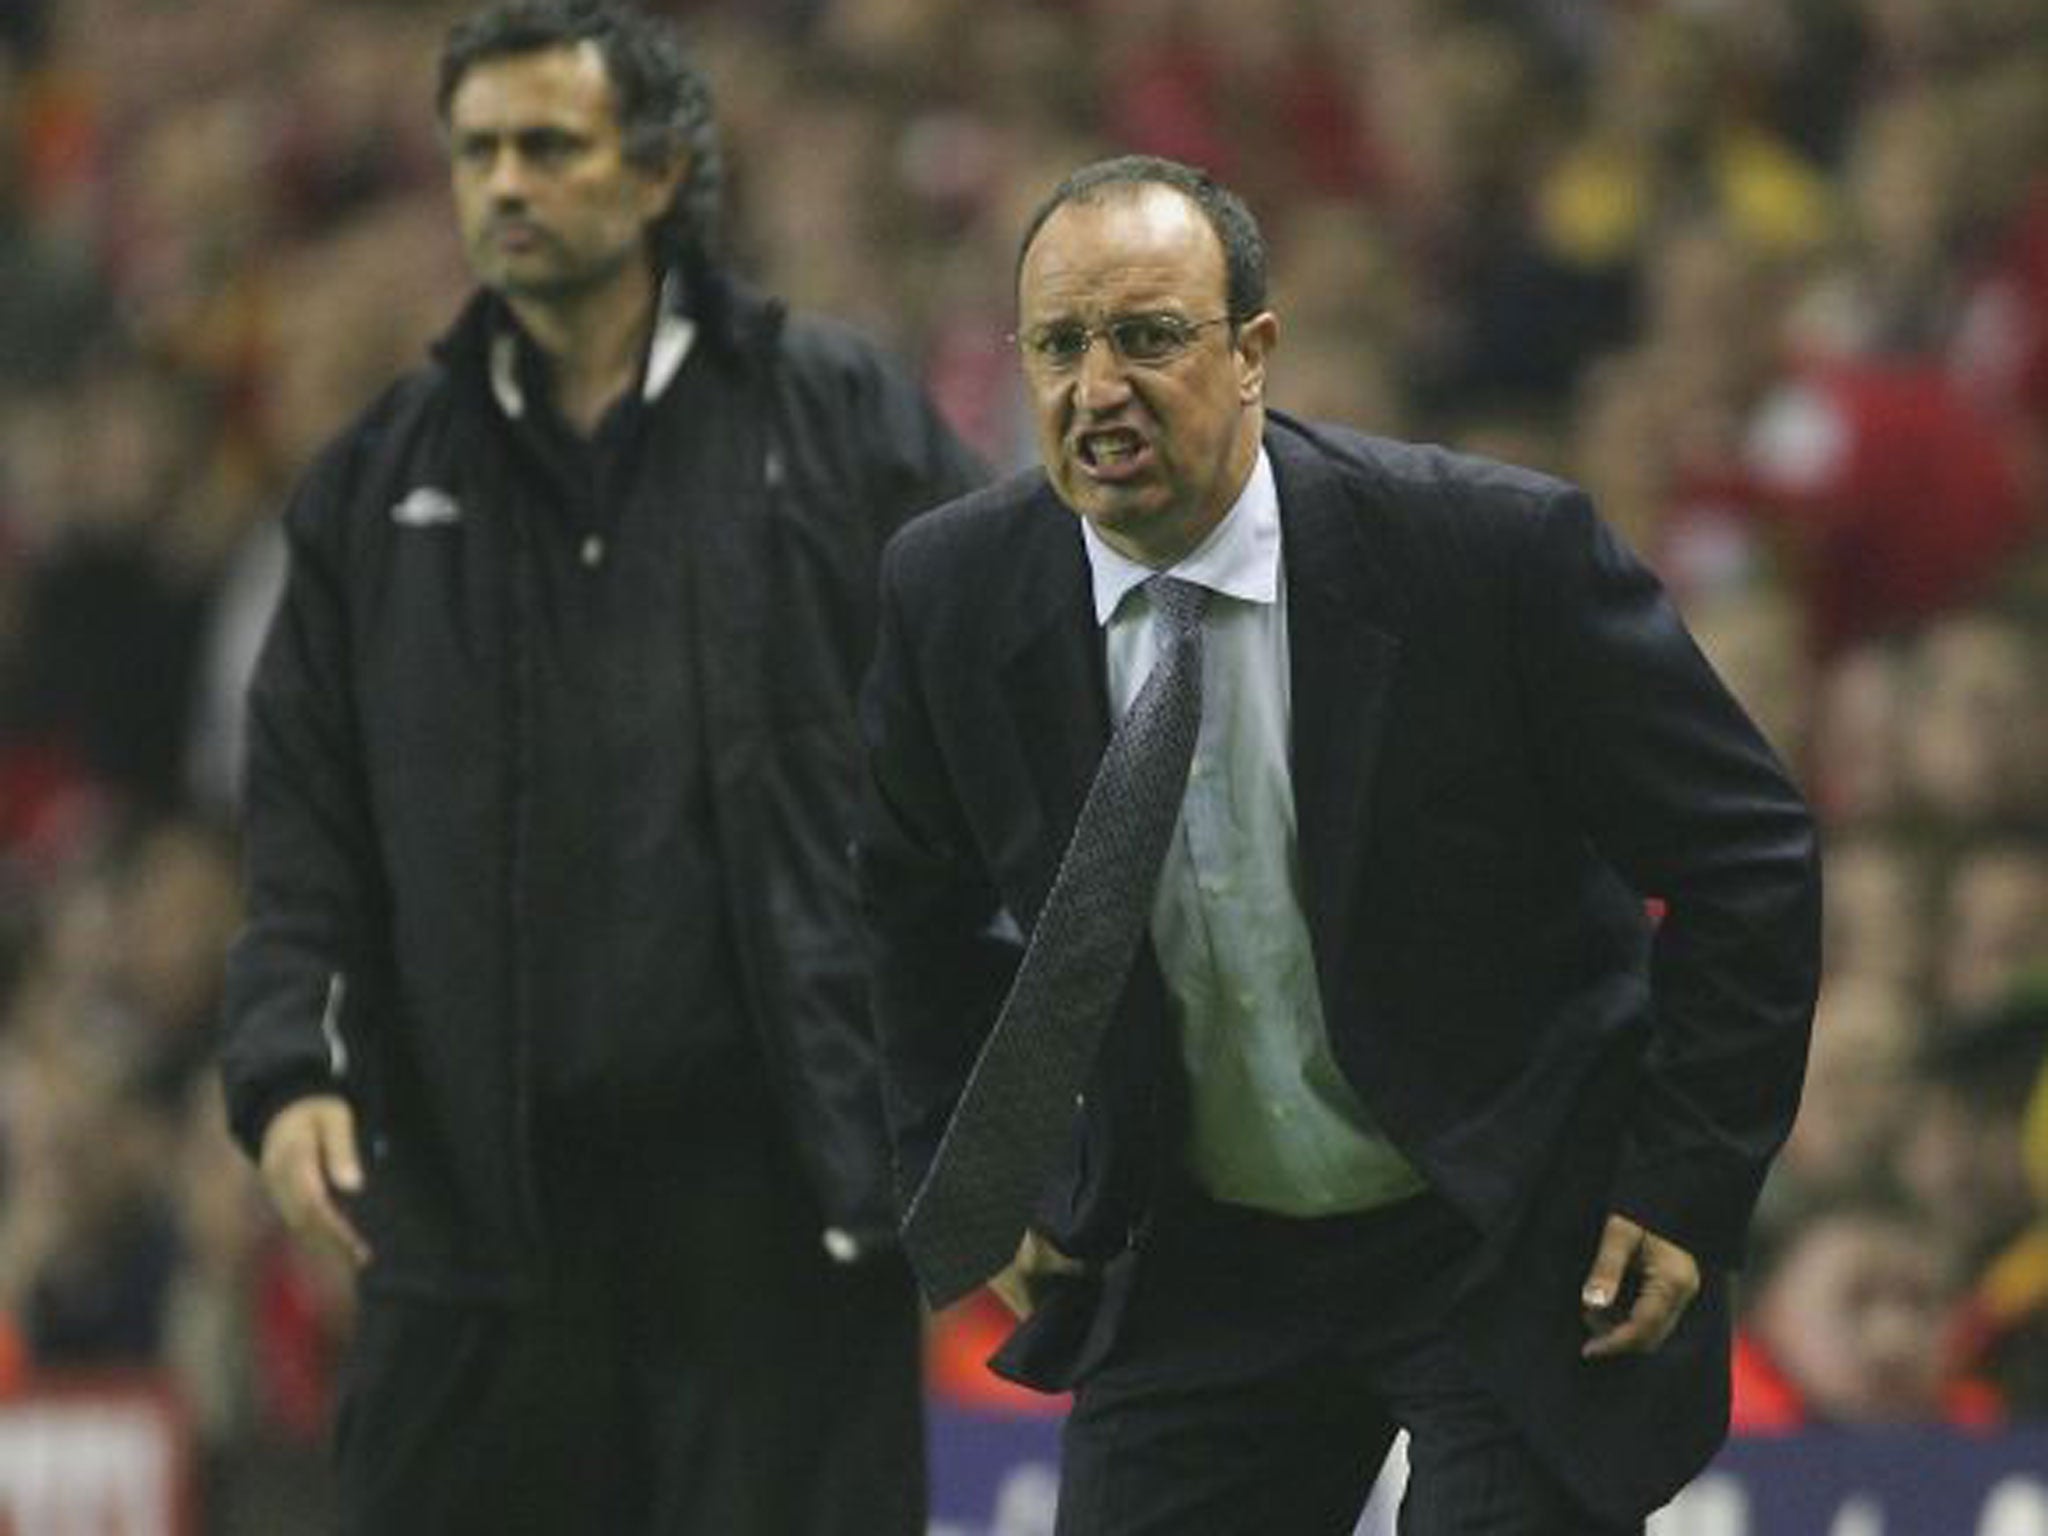 Rafa Benitez was once the master of beating Chelsea in semi-finals, like in 2005 against Jose Mourinho’s men. Now he must lead them through the last four of the FA Cup and Europa League